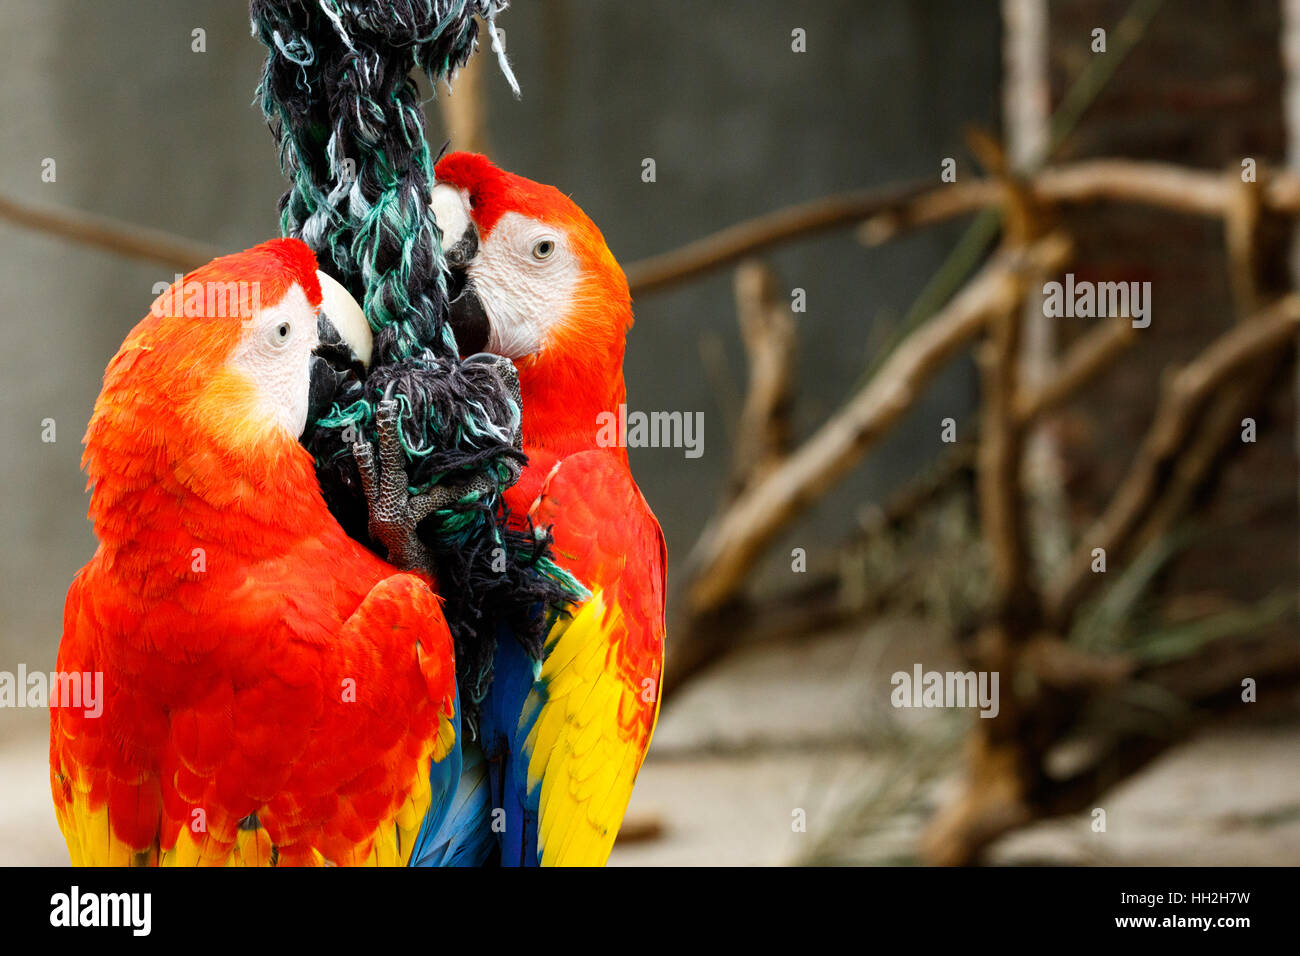 Parrots clinging on a rope with their beaks. Stock Photo